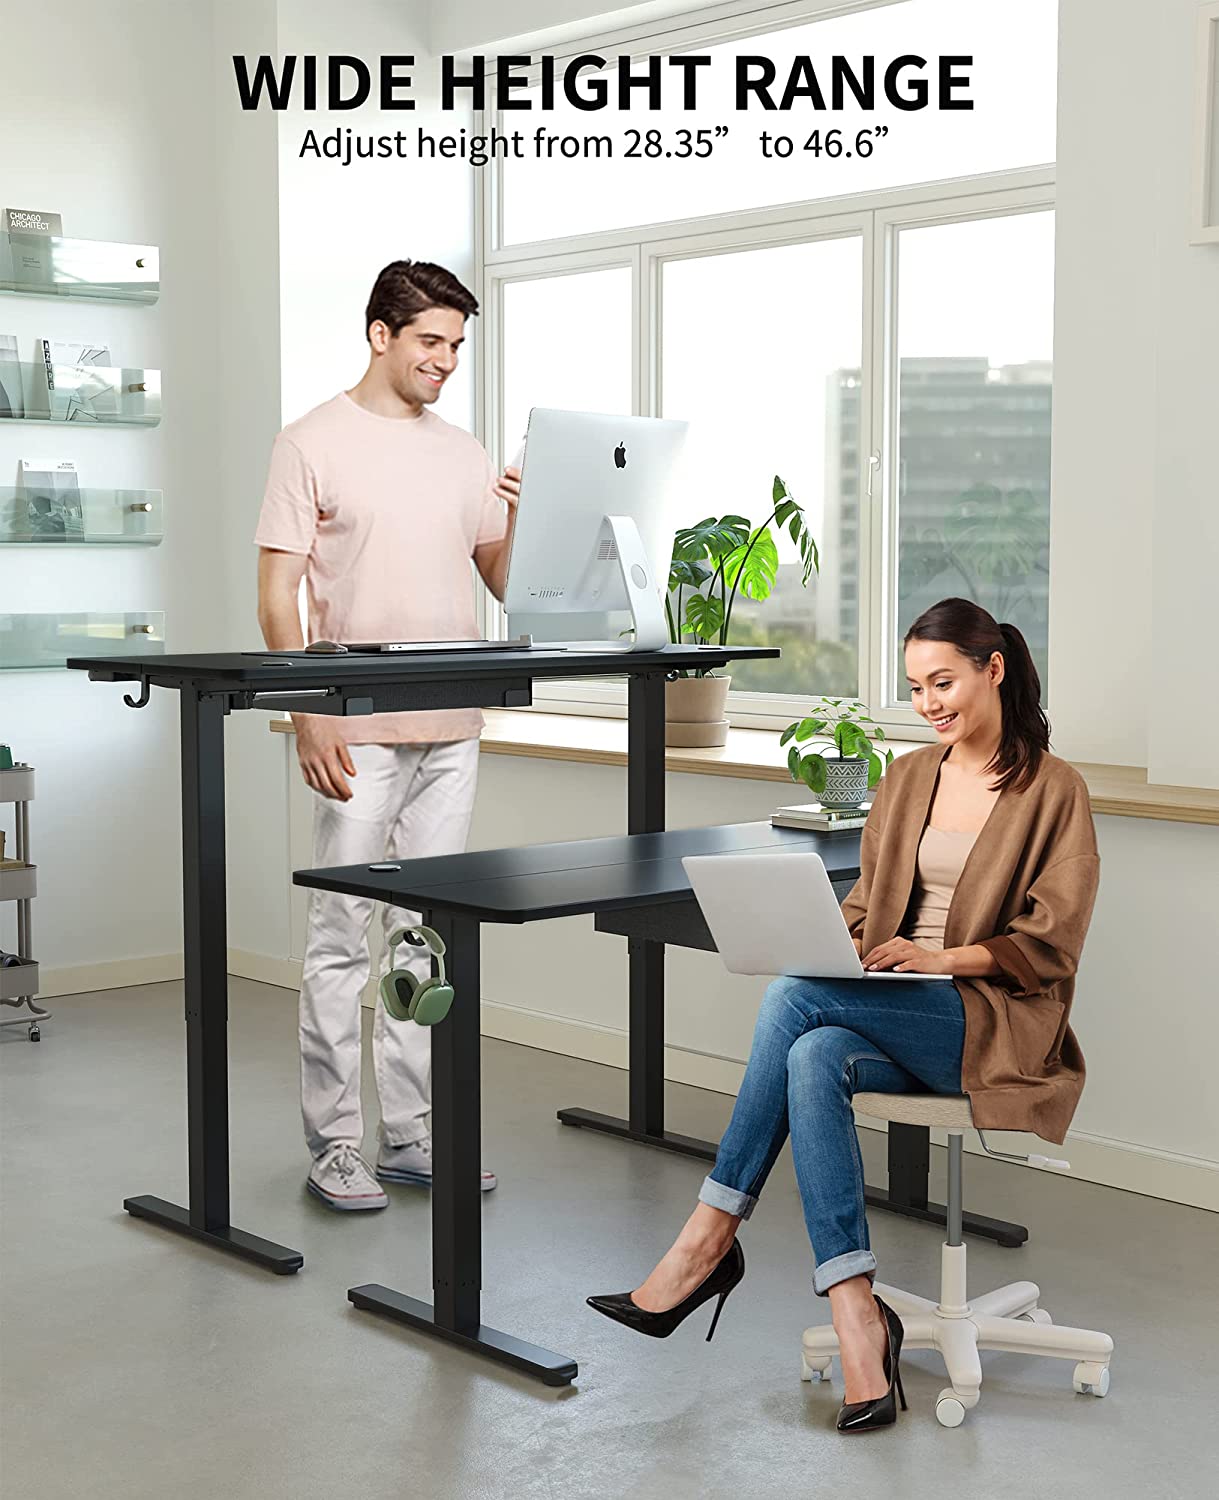 Banti Adjustable Height Standing Desk - in home office setting